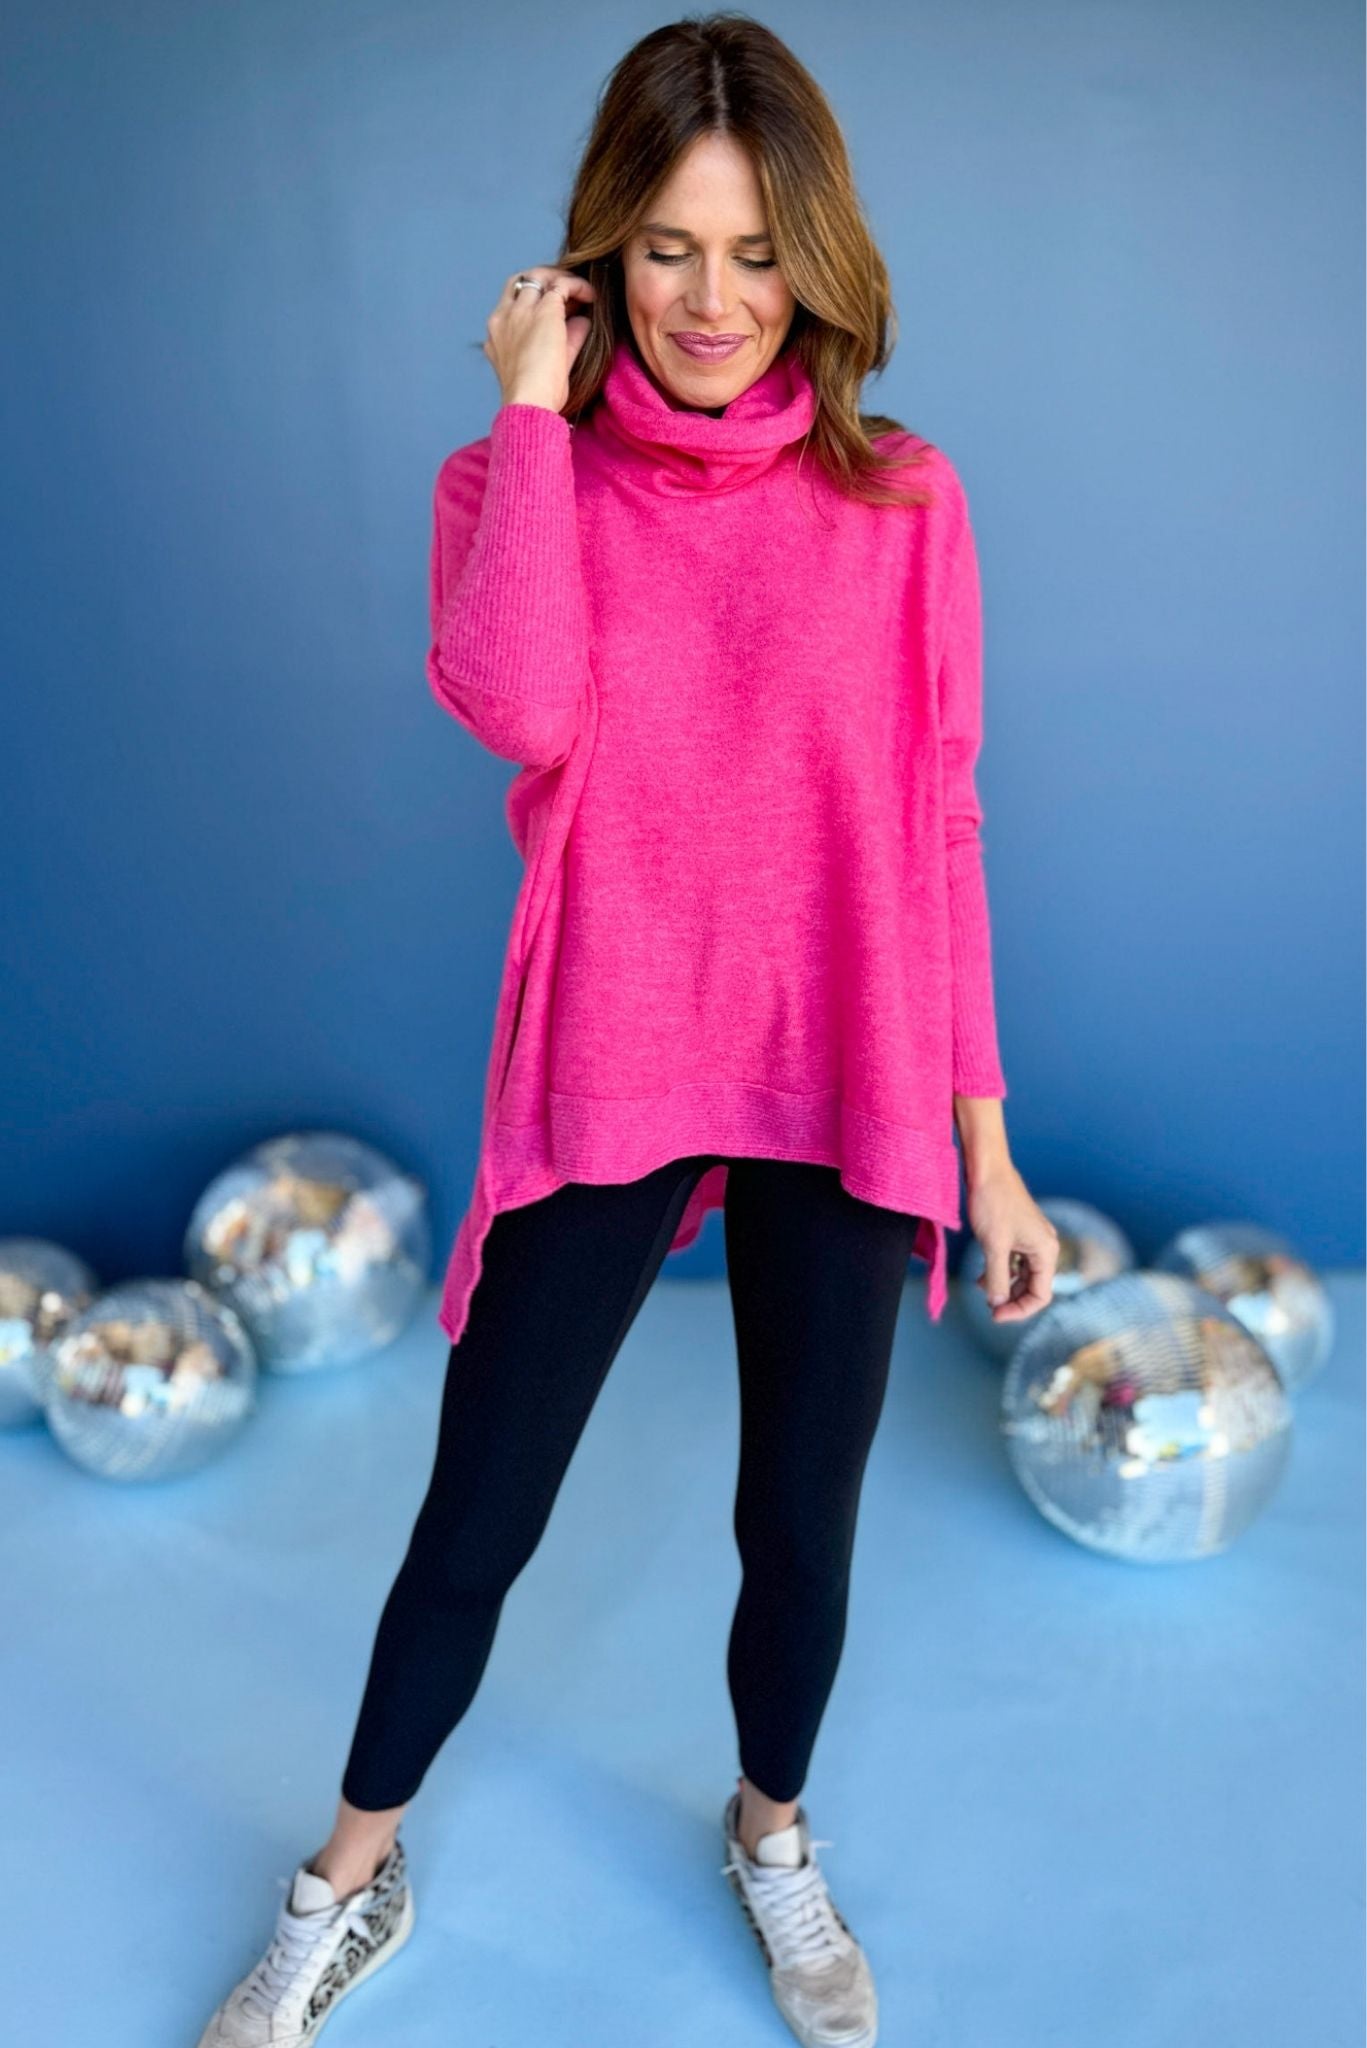 Hot Pink Cowl Neck Top, cozy style, cozy top, must have cozy, must have top, must have style, winter style, winter fashion, elevated style, elevated top, mom style, winter top, shop style your senses by mallory fitzsimmons